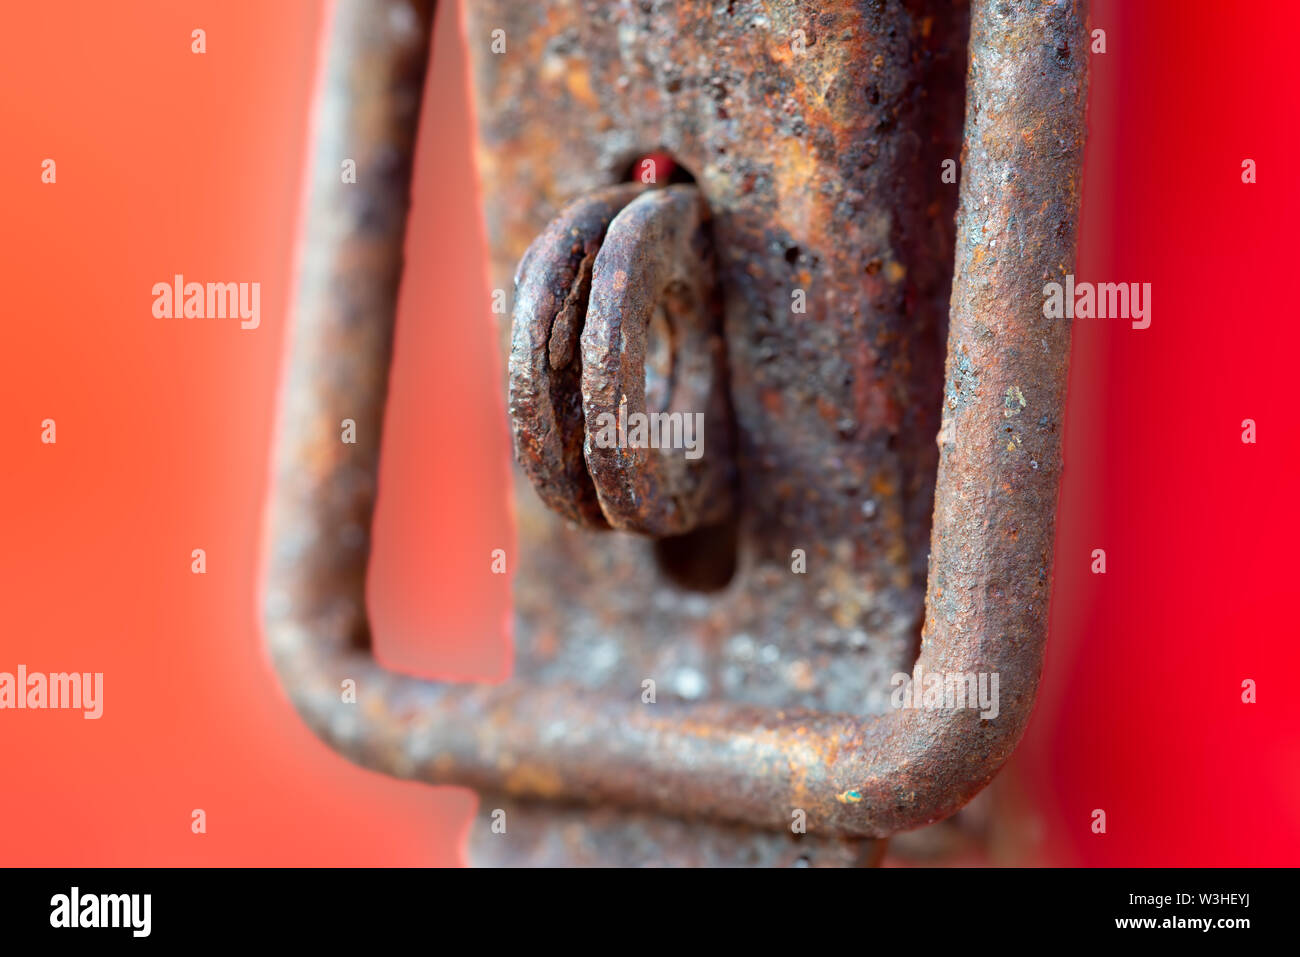 Rusty, Weathered Hasp and Staple on Orange, Red Background Stock Photo